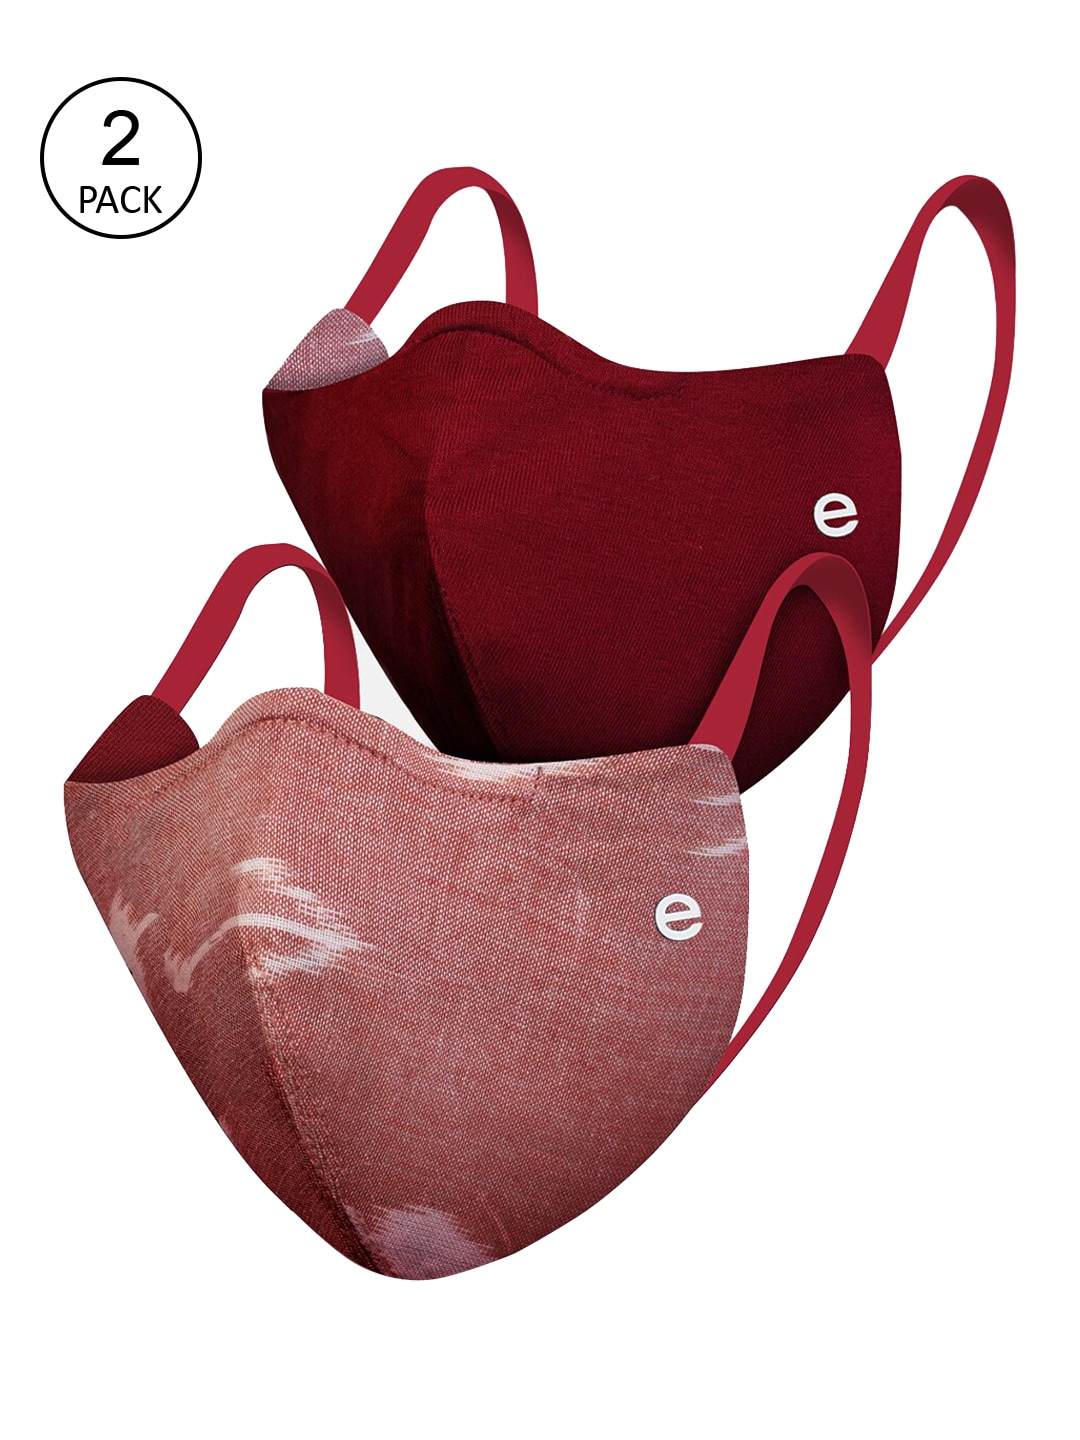 Enamor Pack Of 2 Maroon & Pink 3-Ply MA02 Reversible Reusable Ikat Craft Cloth Masks Price in India